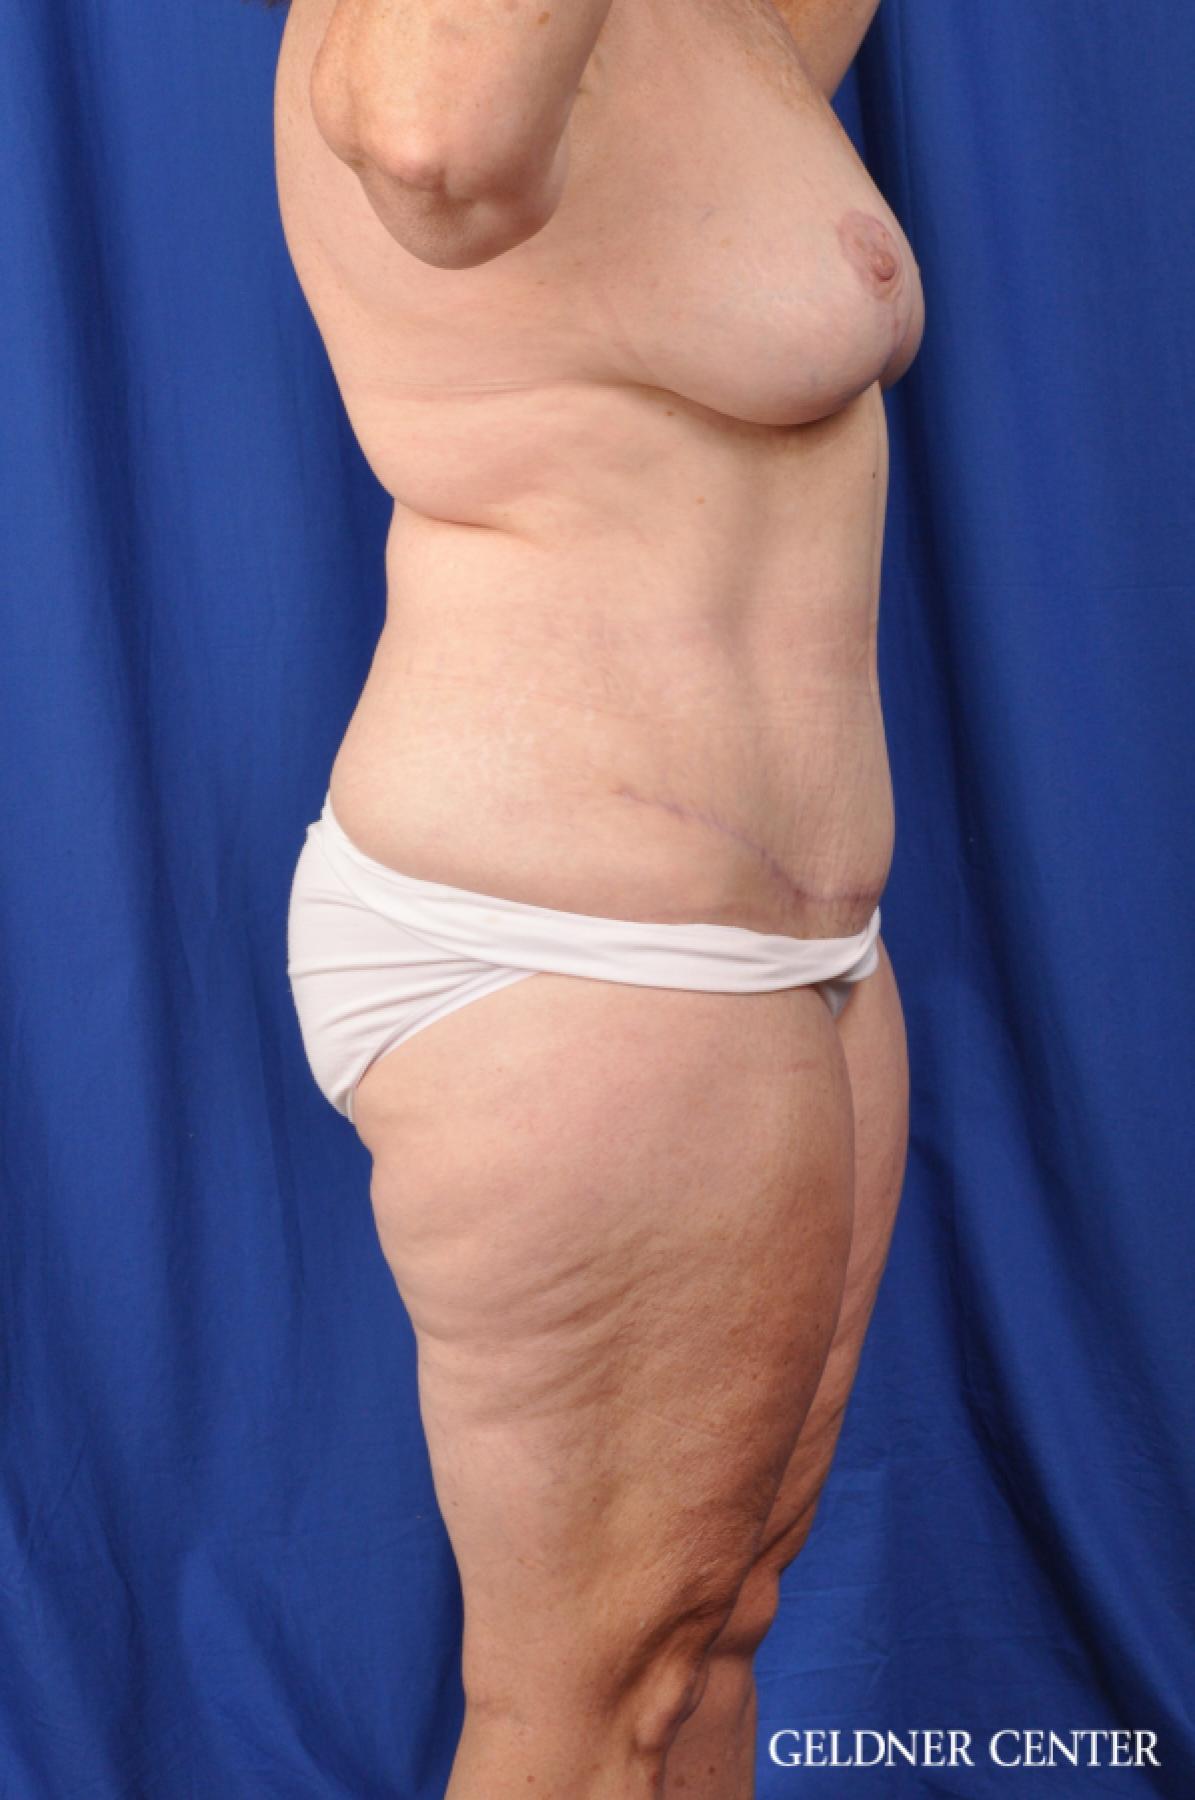 Abdominoplasty Patient 1 before and after photos -  After 3